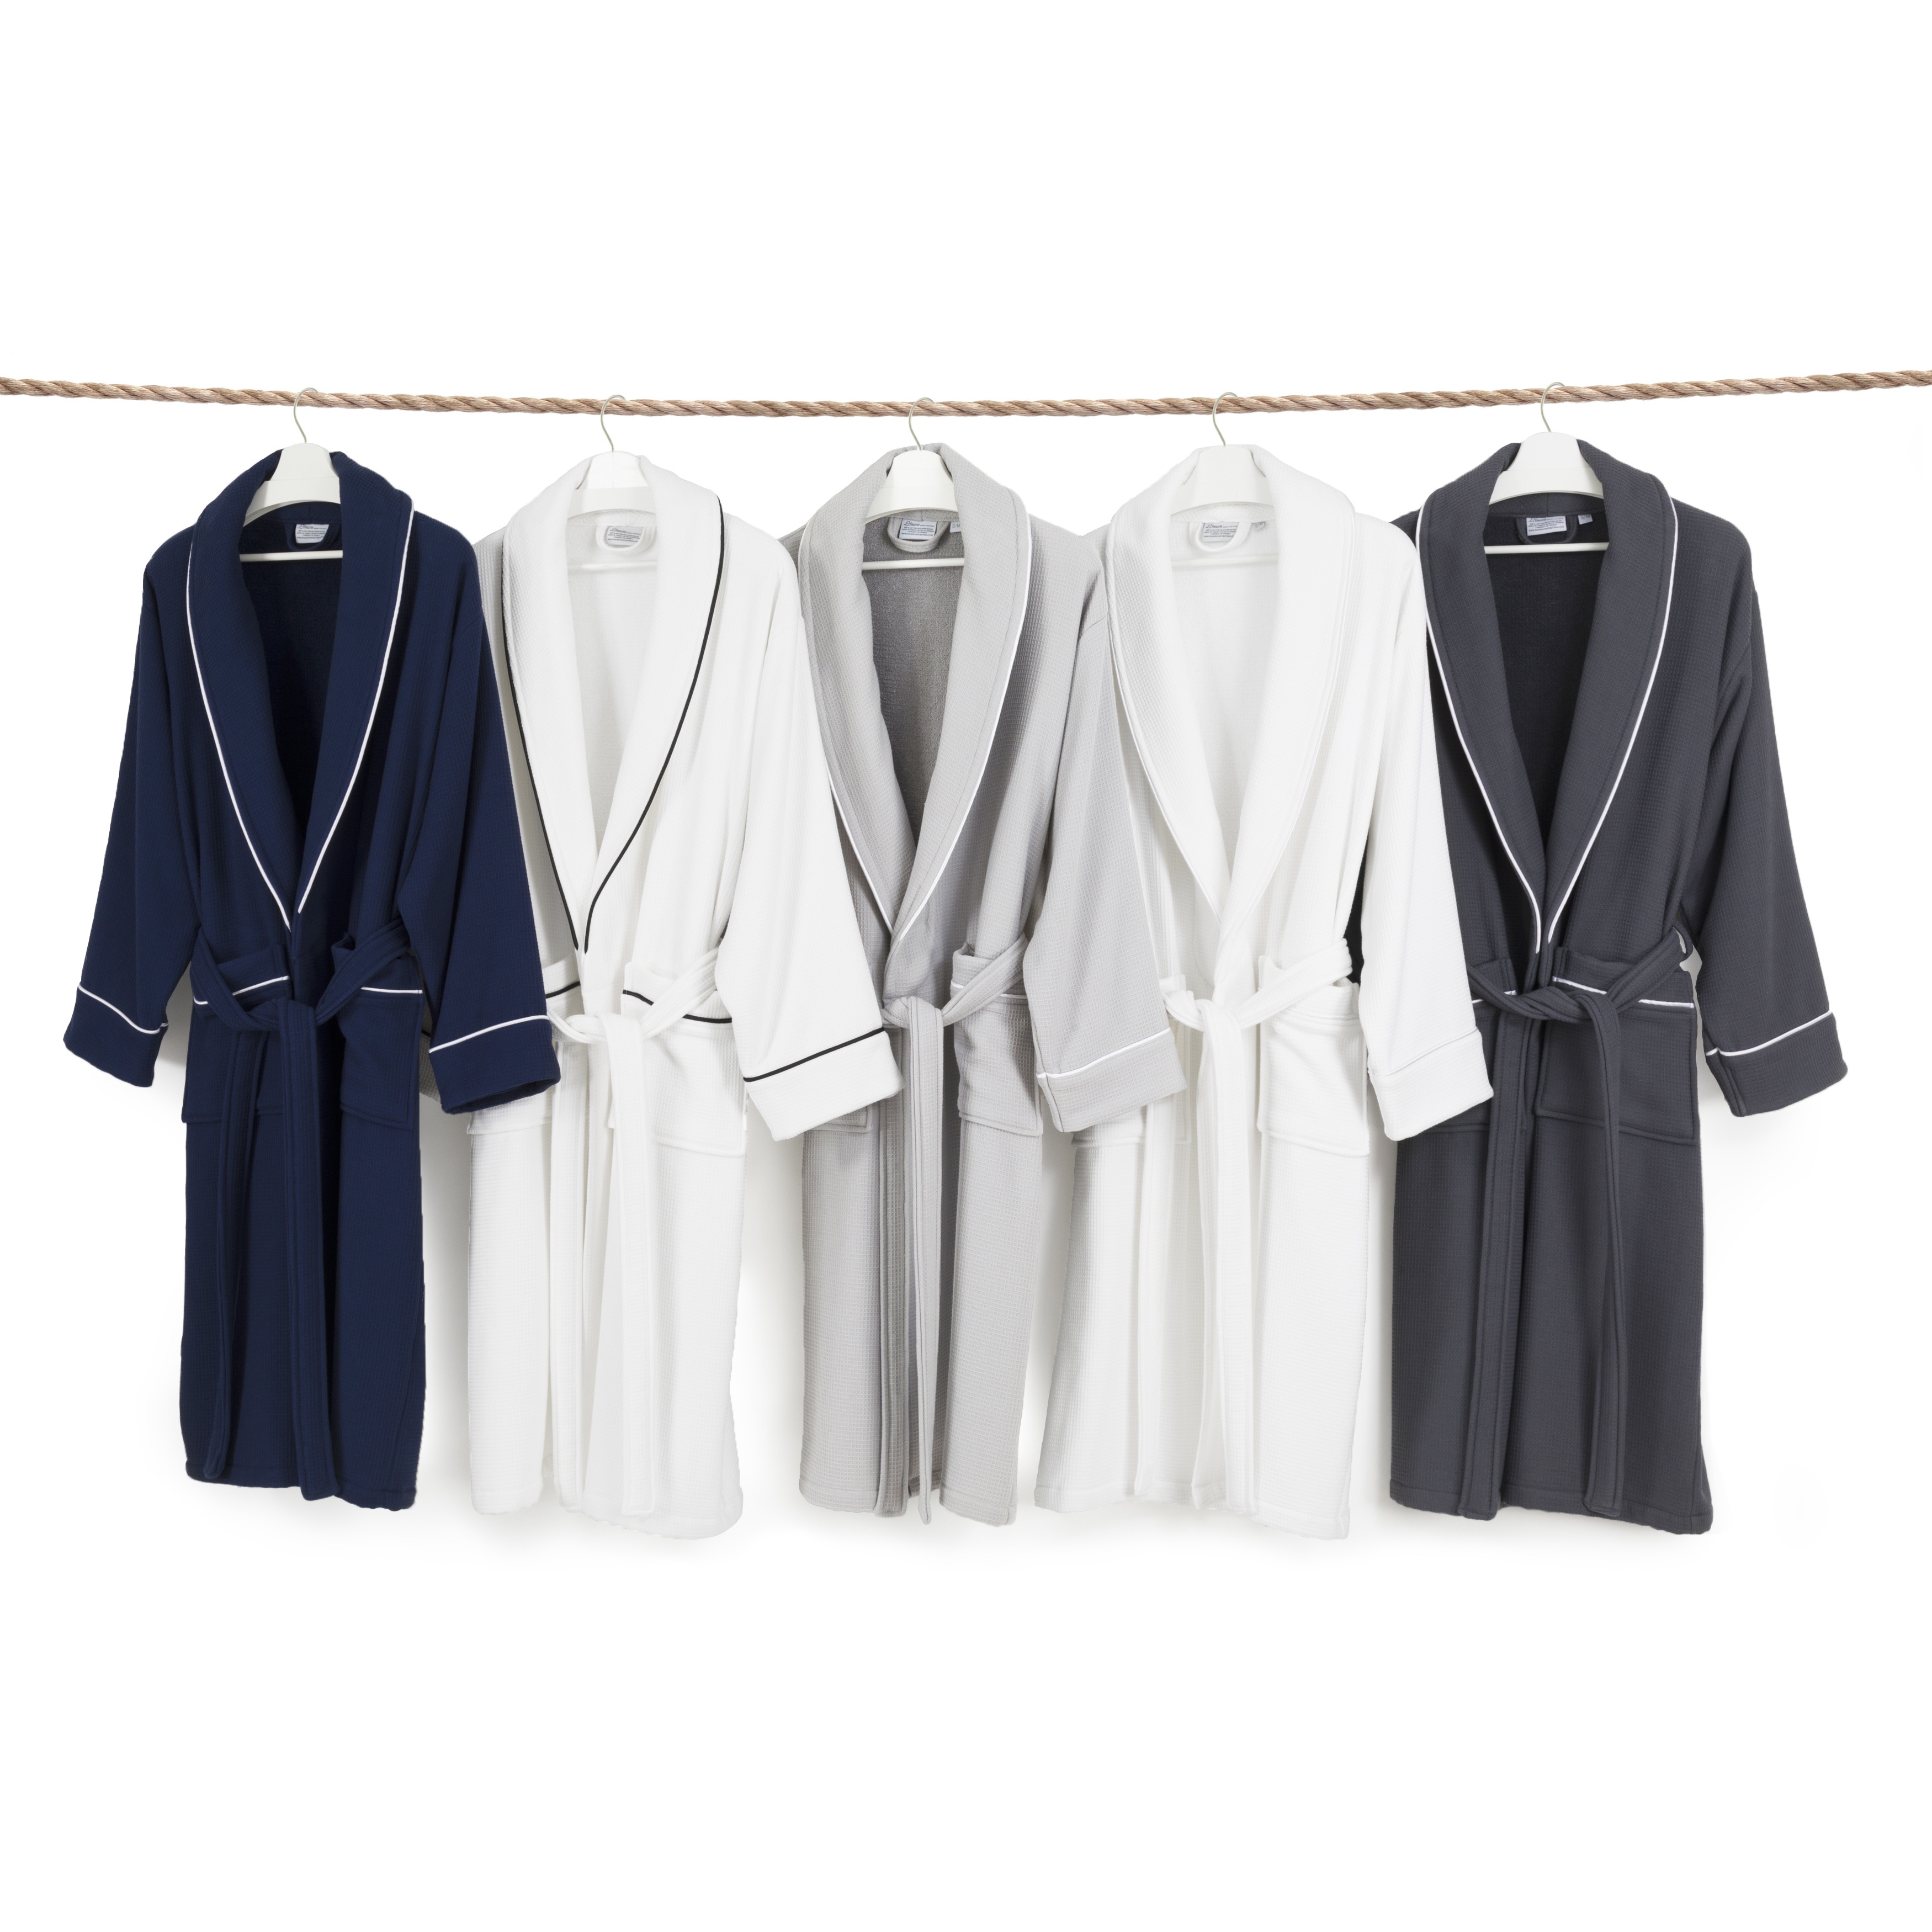 full-length sleeves, this unisex robe keeps you dry and warm, while the sub...